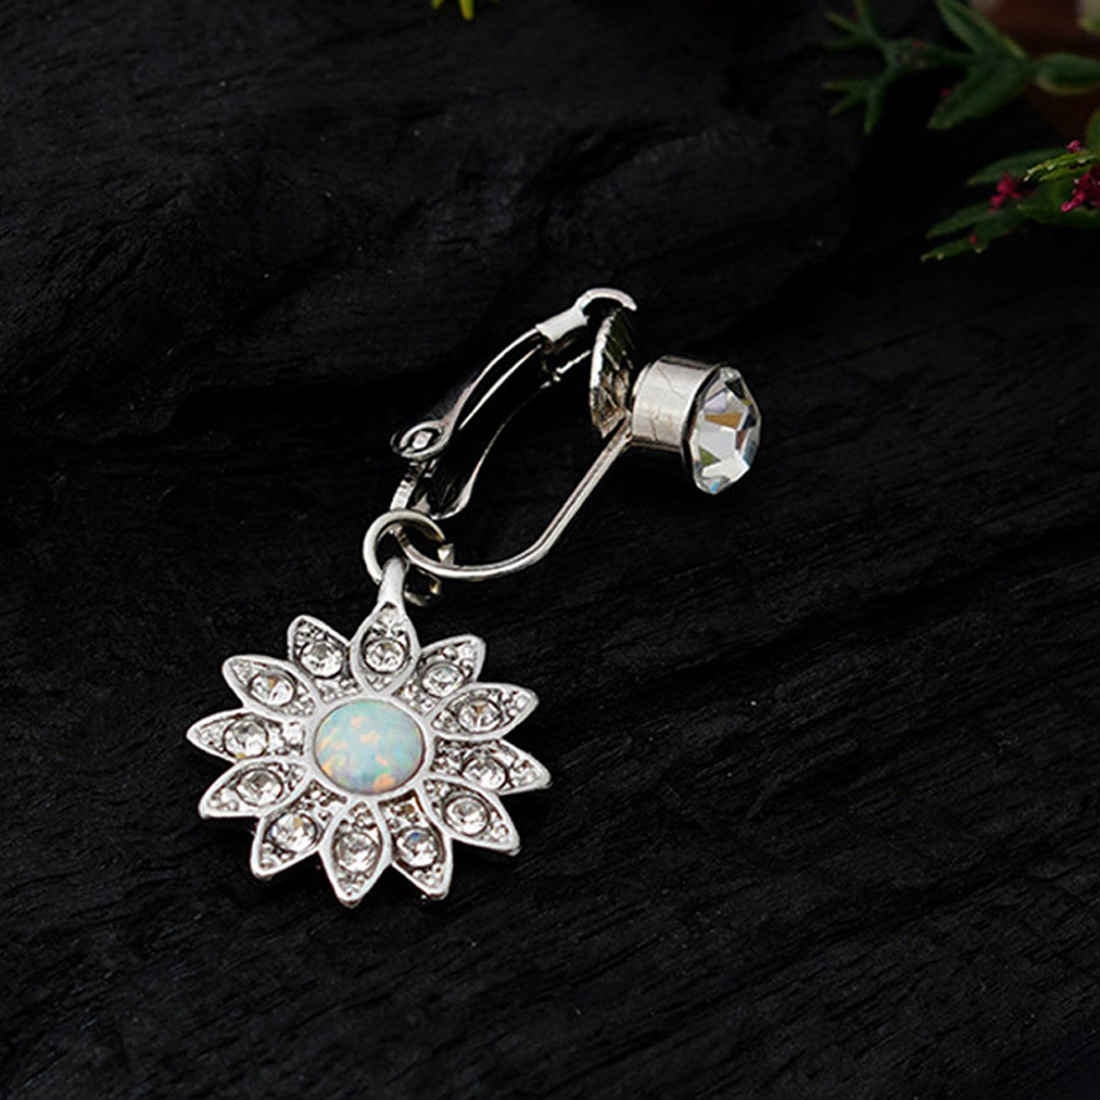 Marble Centered Flower Charm Silver Belly Button Ring